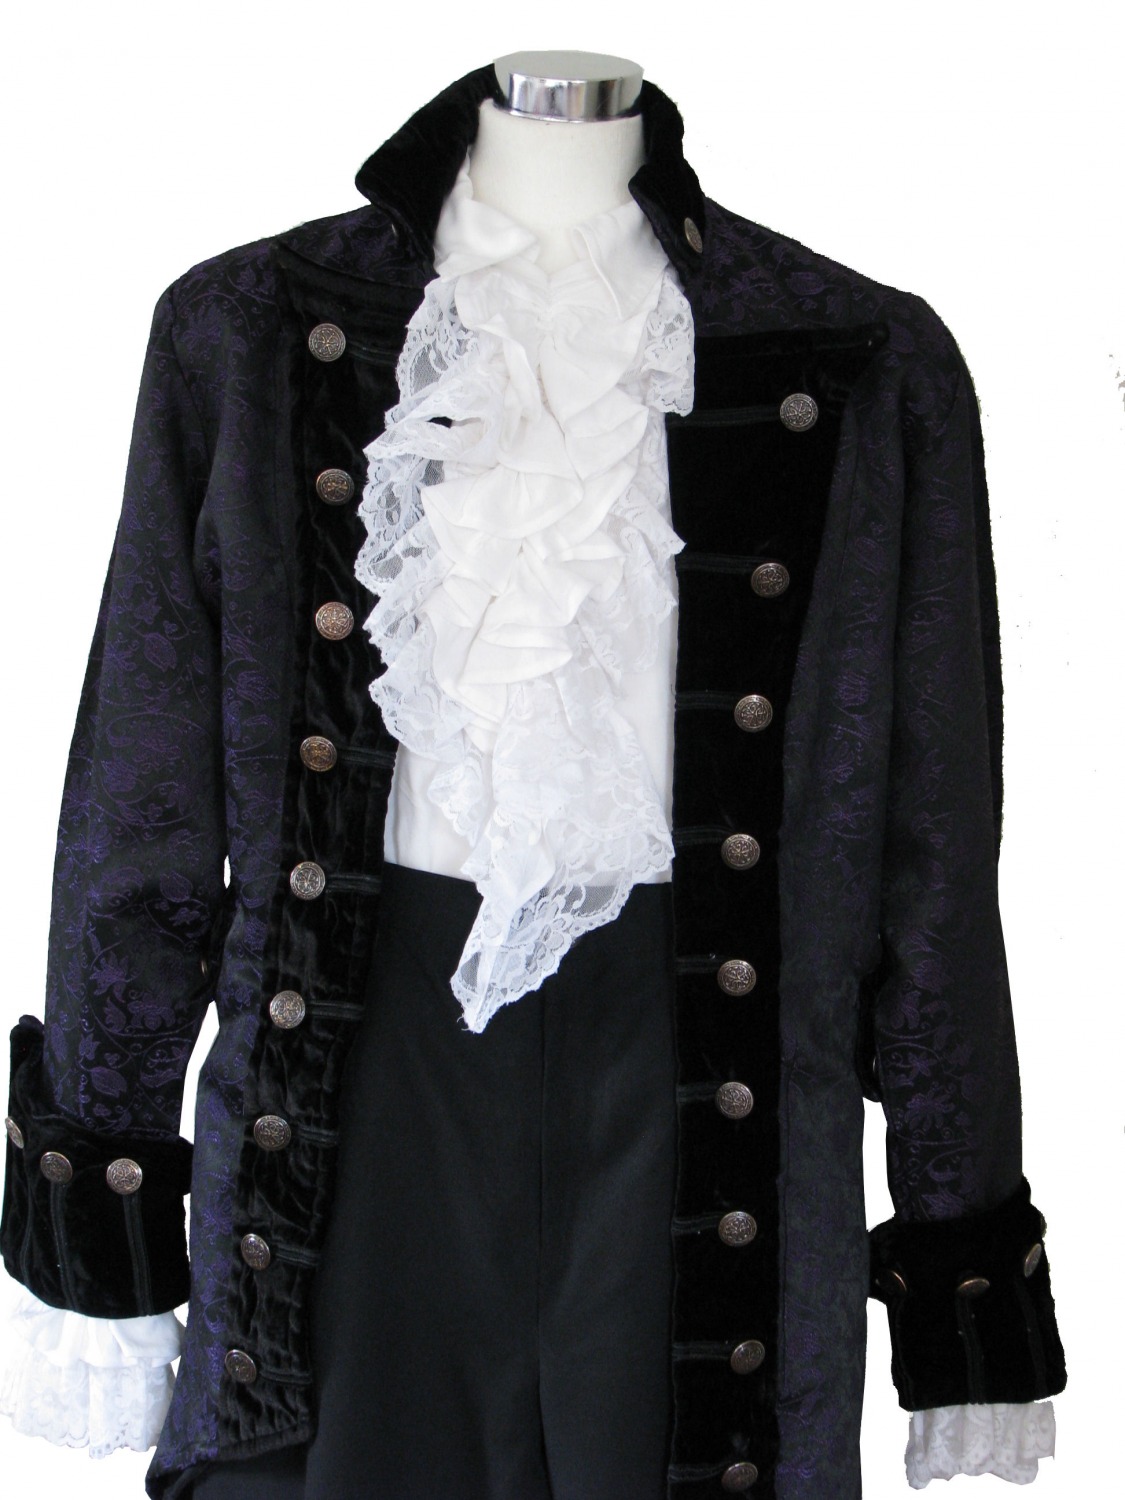 Men's 18th Century Masked Ball Costume - Complete Costumes, Costume Hire